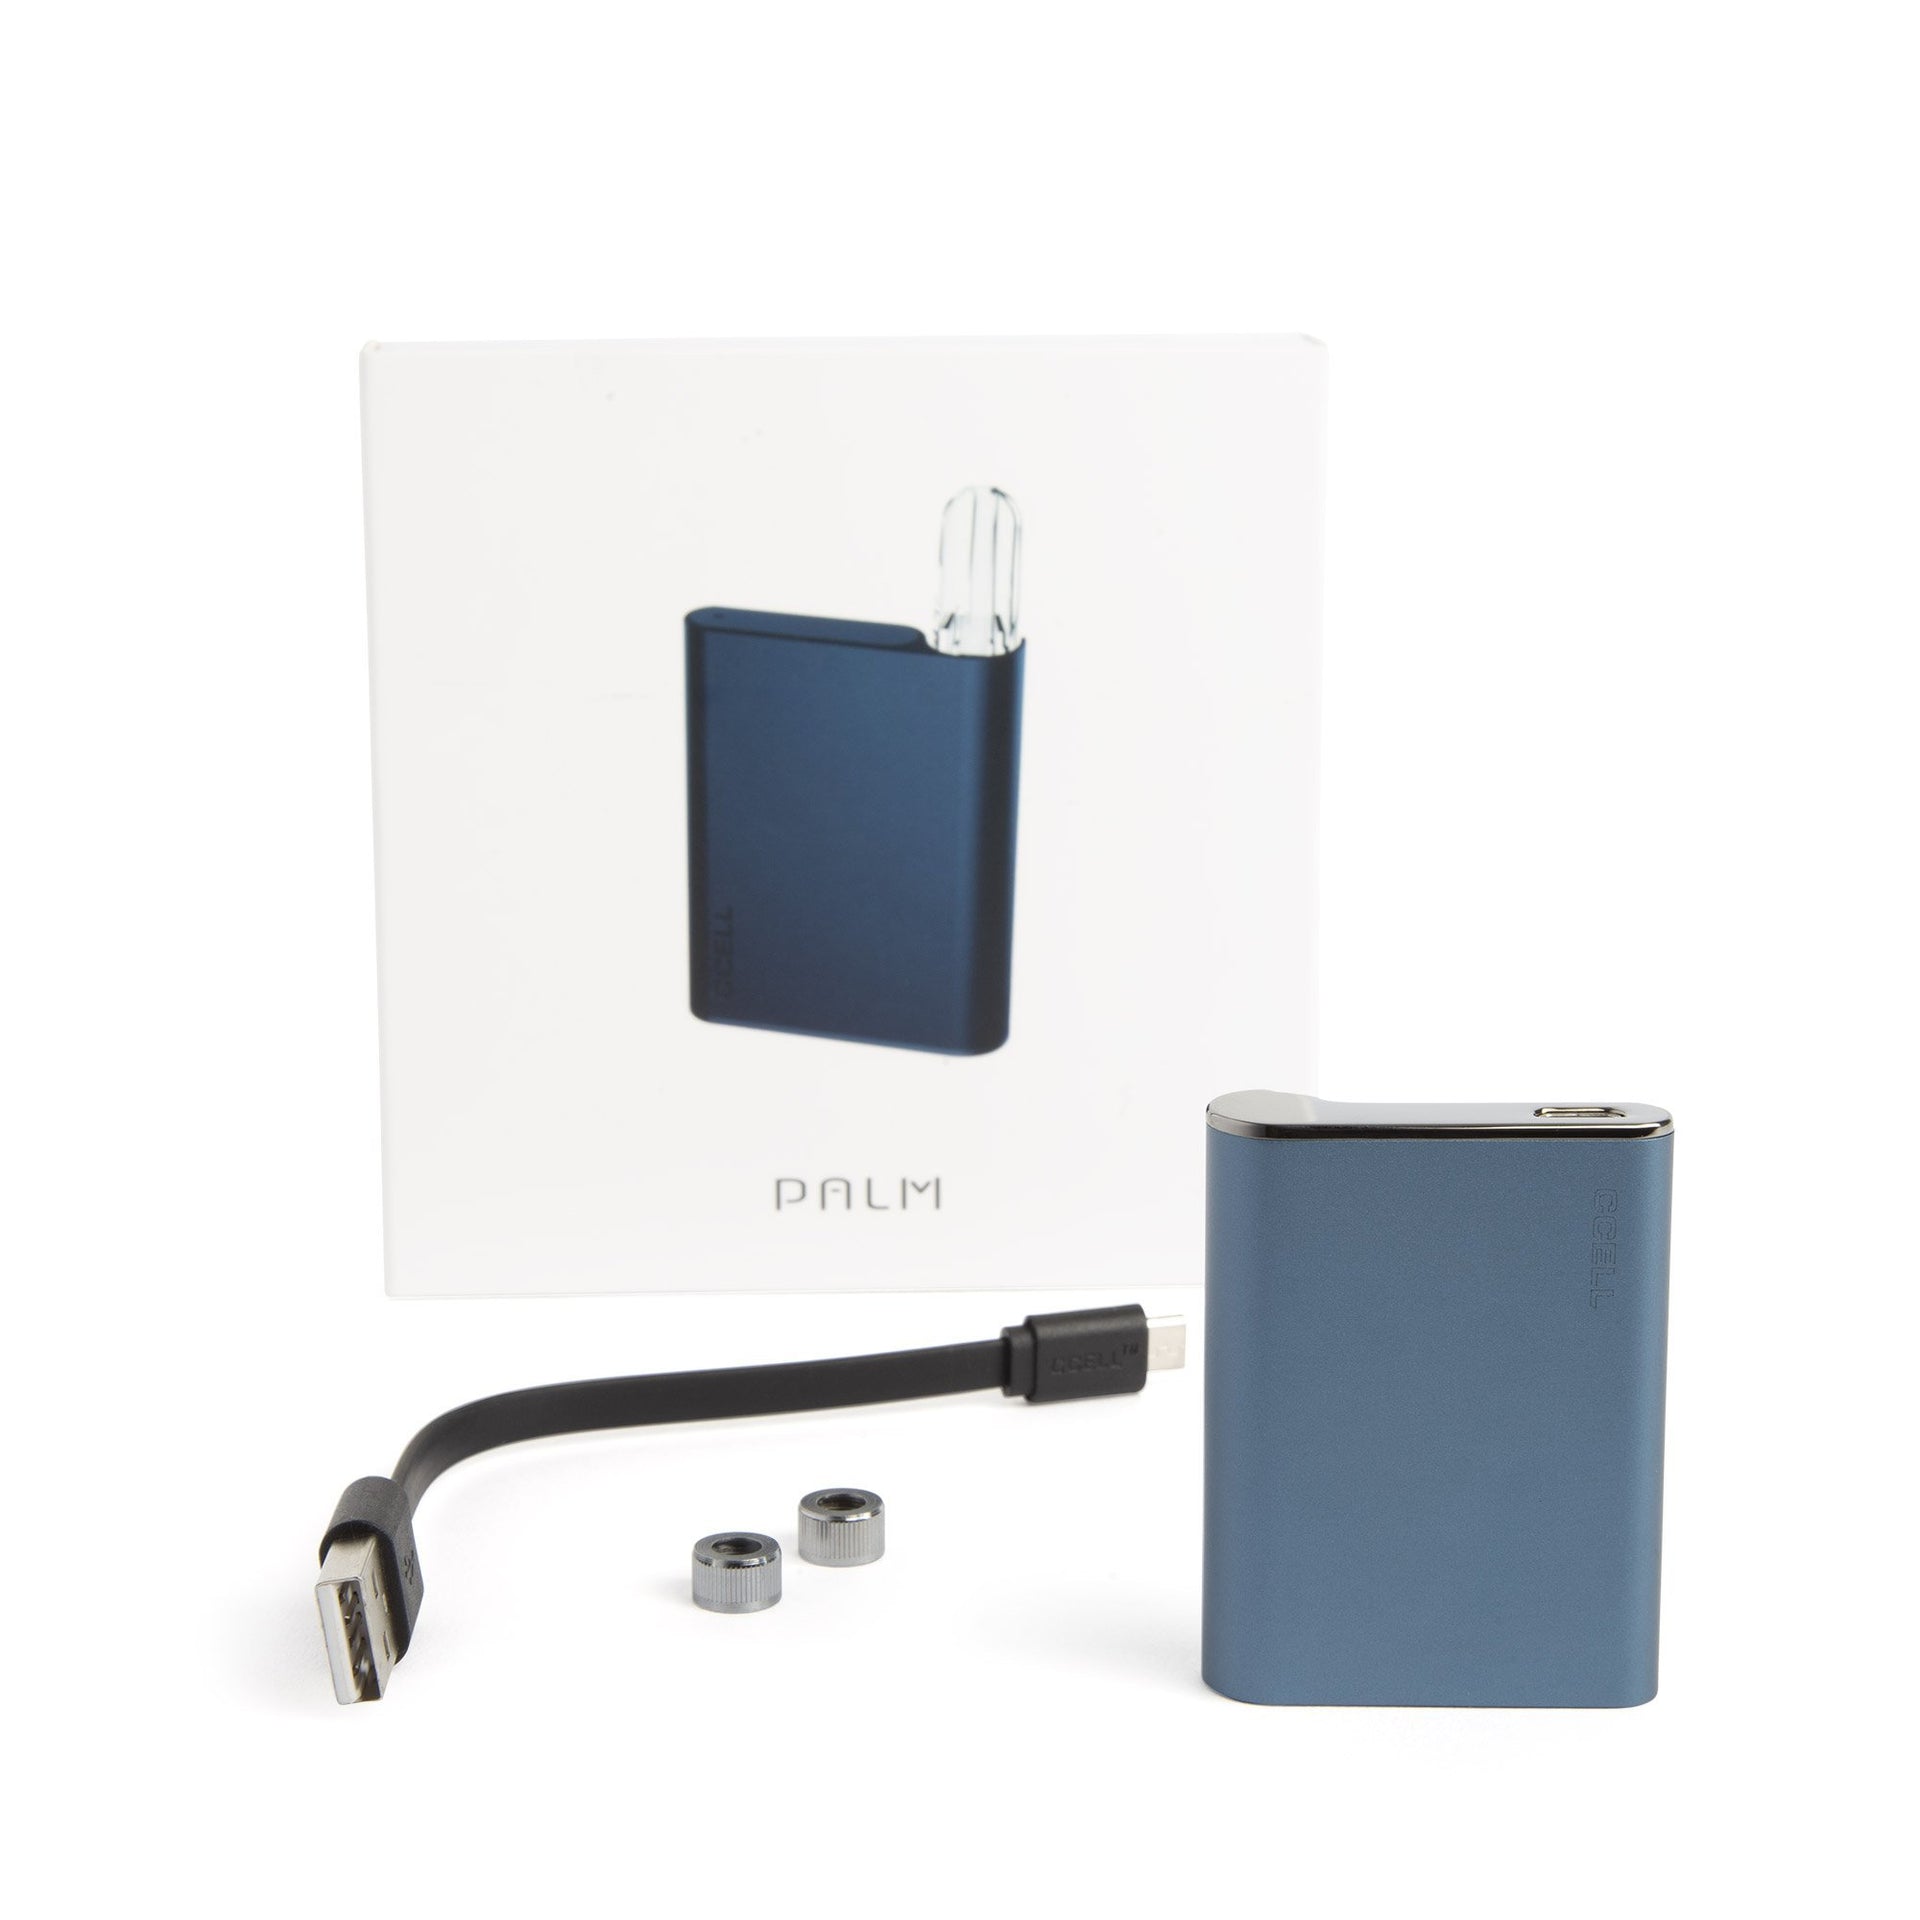 CCell Palm Cartridge Vape Battery - 420 Science - The most trusted online smoke shop.